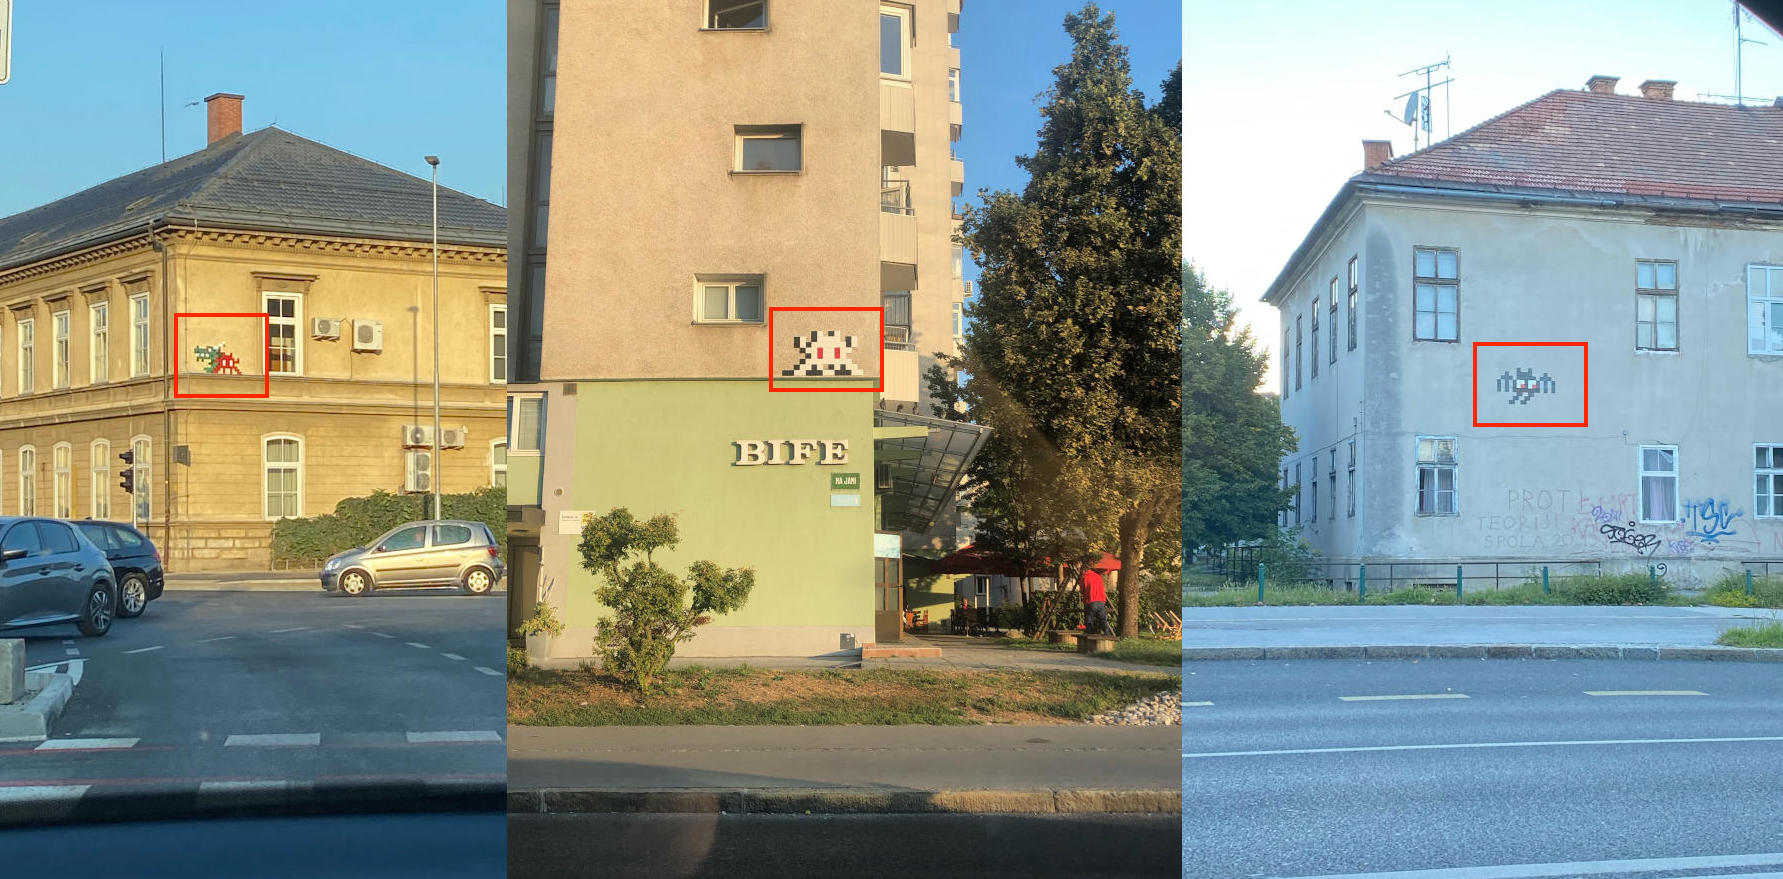 A couple of Space Invaders located around major intersections in Ljubljana